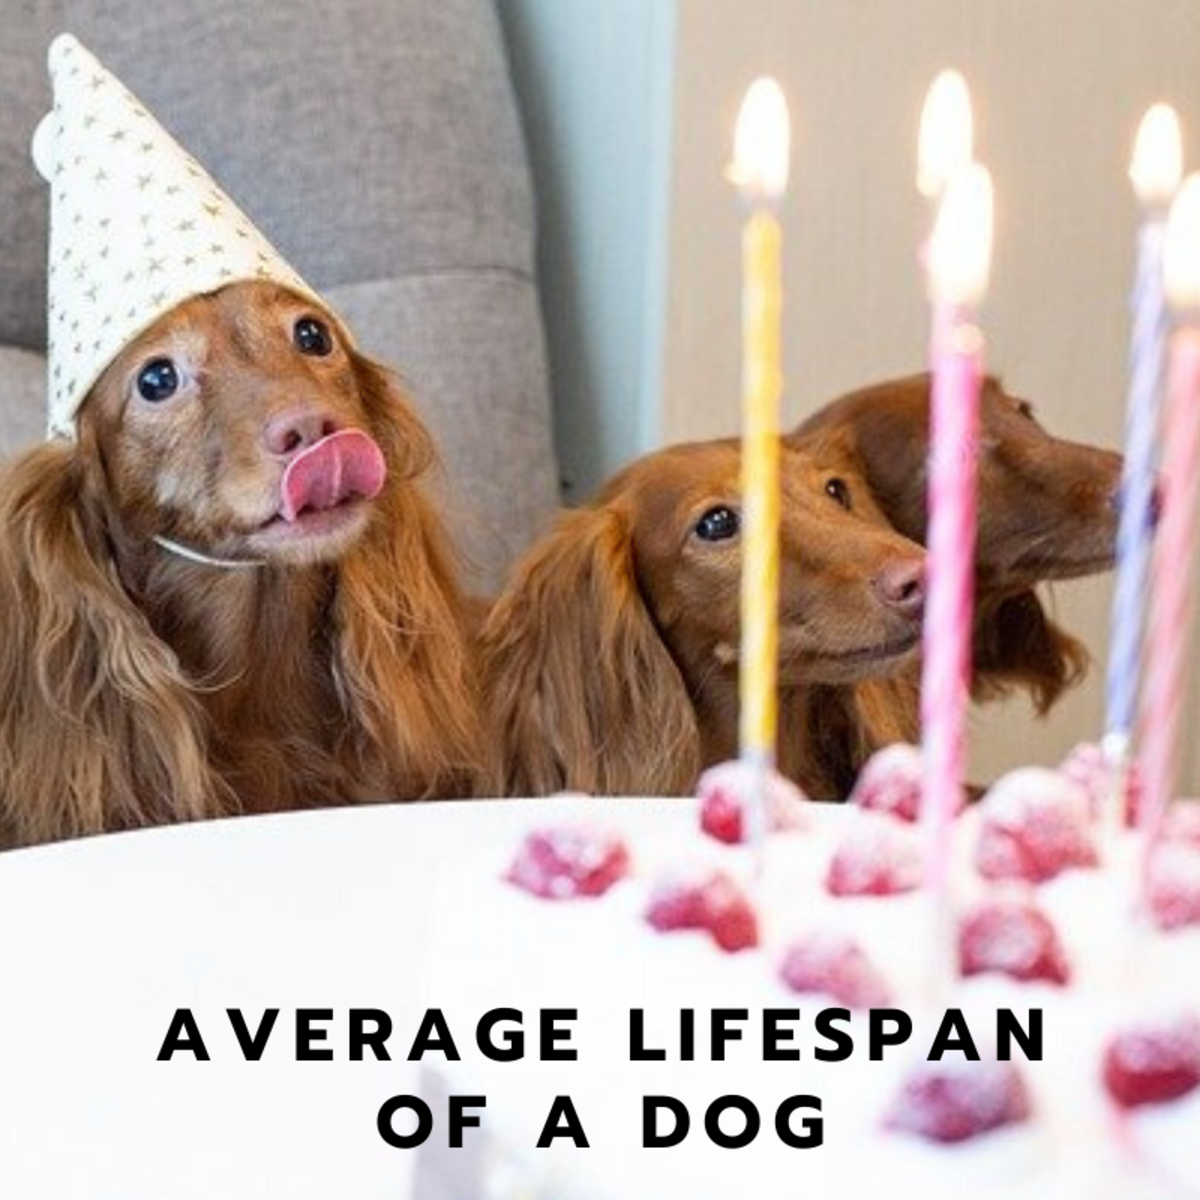 The Average Lifespan of a Dog and 5 Benefits of Having One